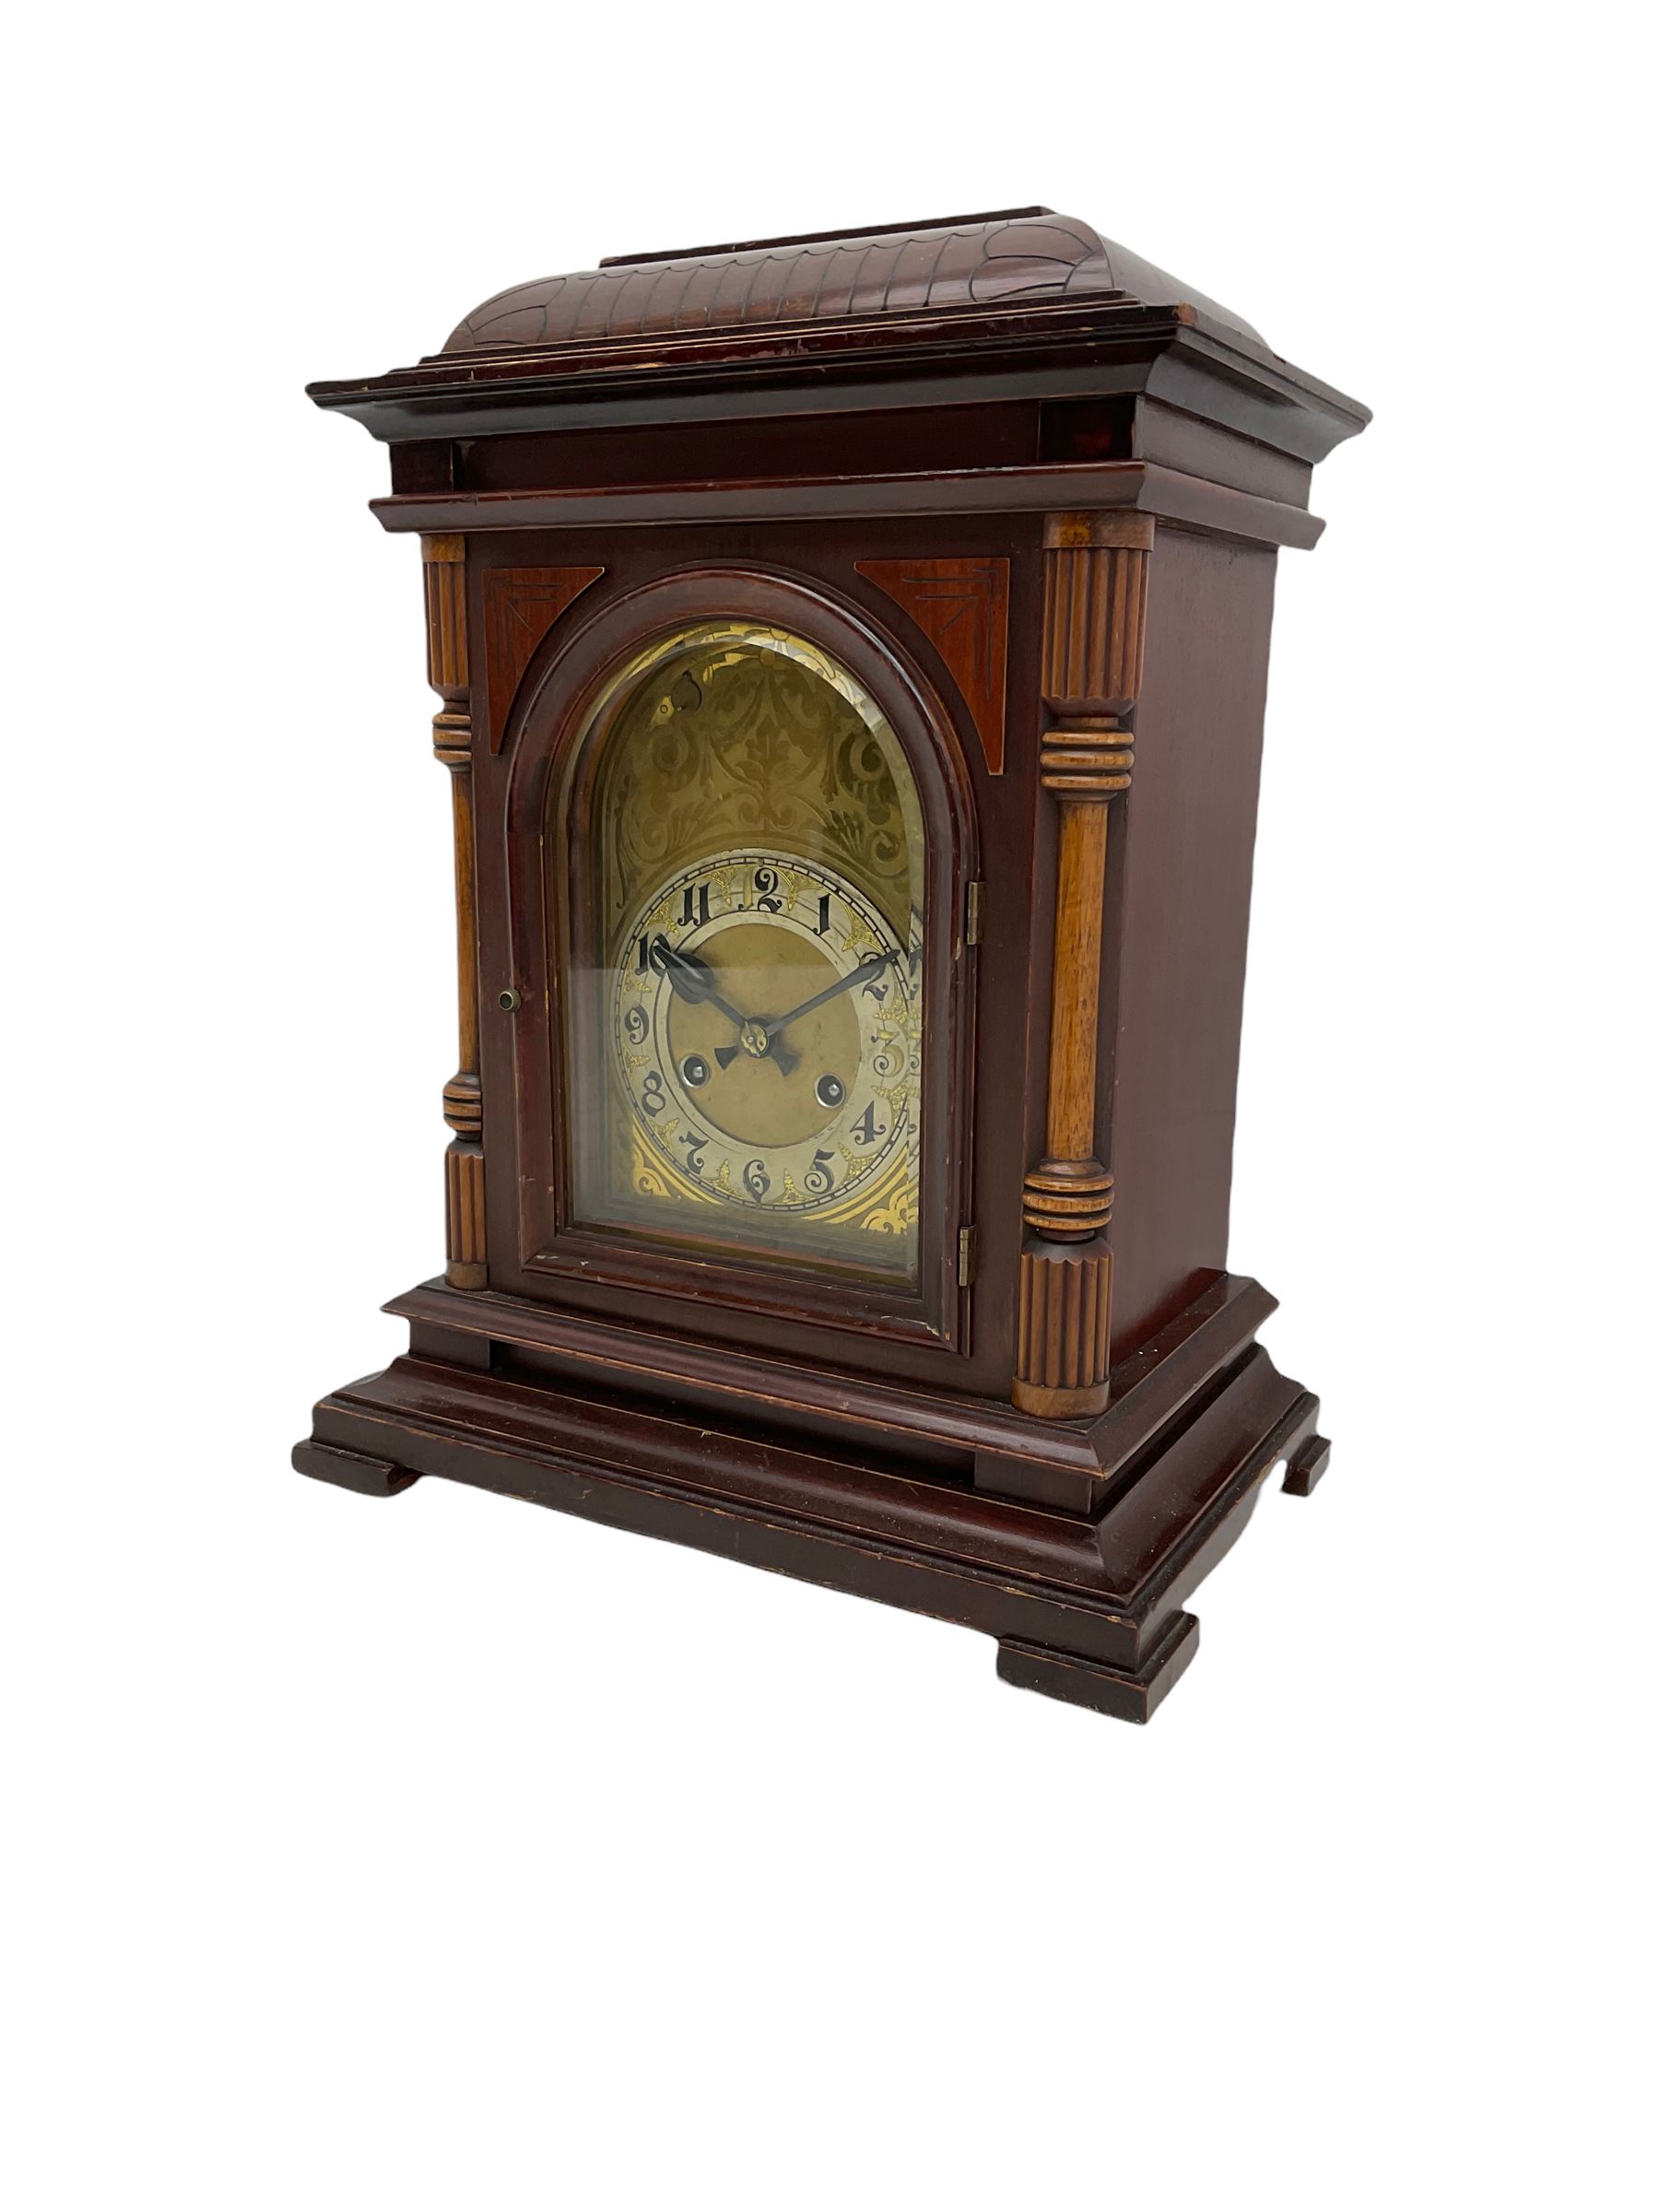 A Junghans two train mantle clock with a subsidiary third chiming train - Image 2 of 4